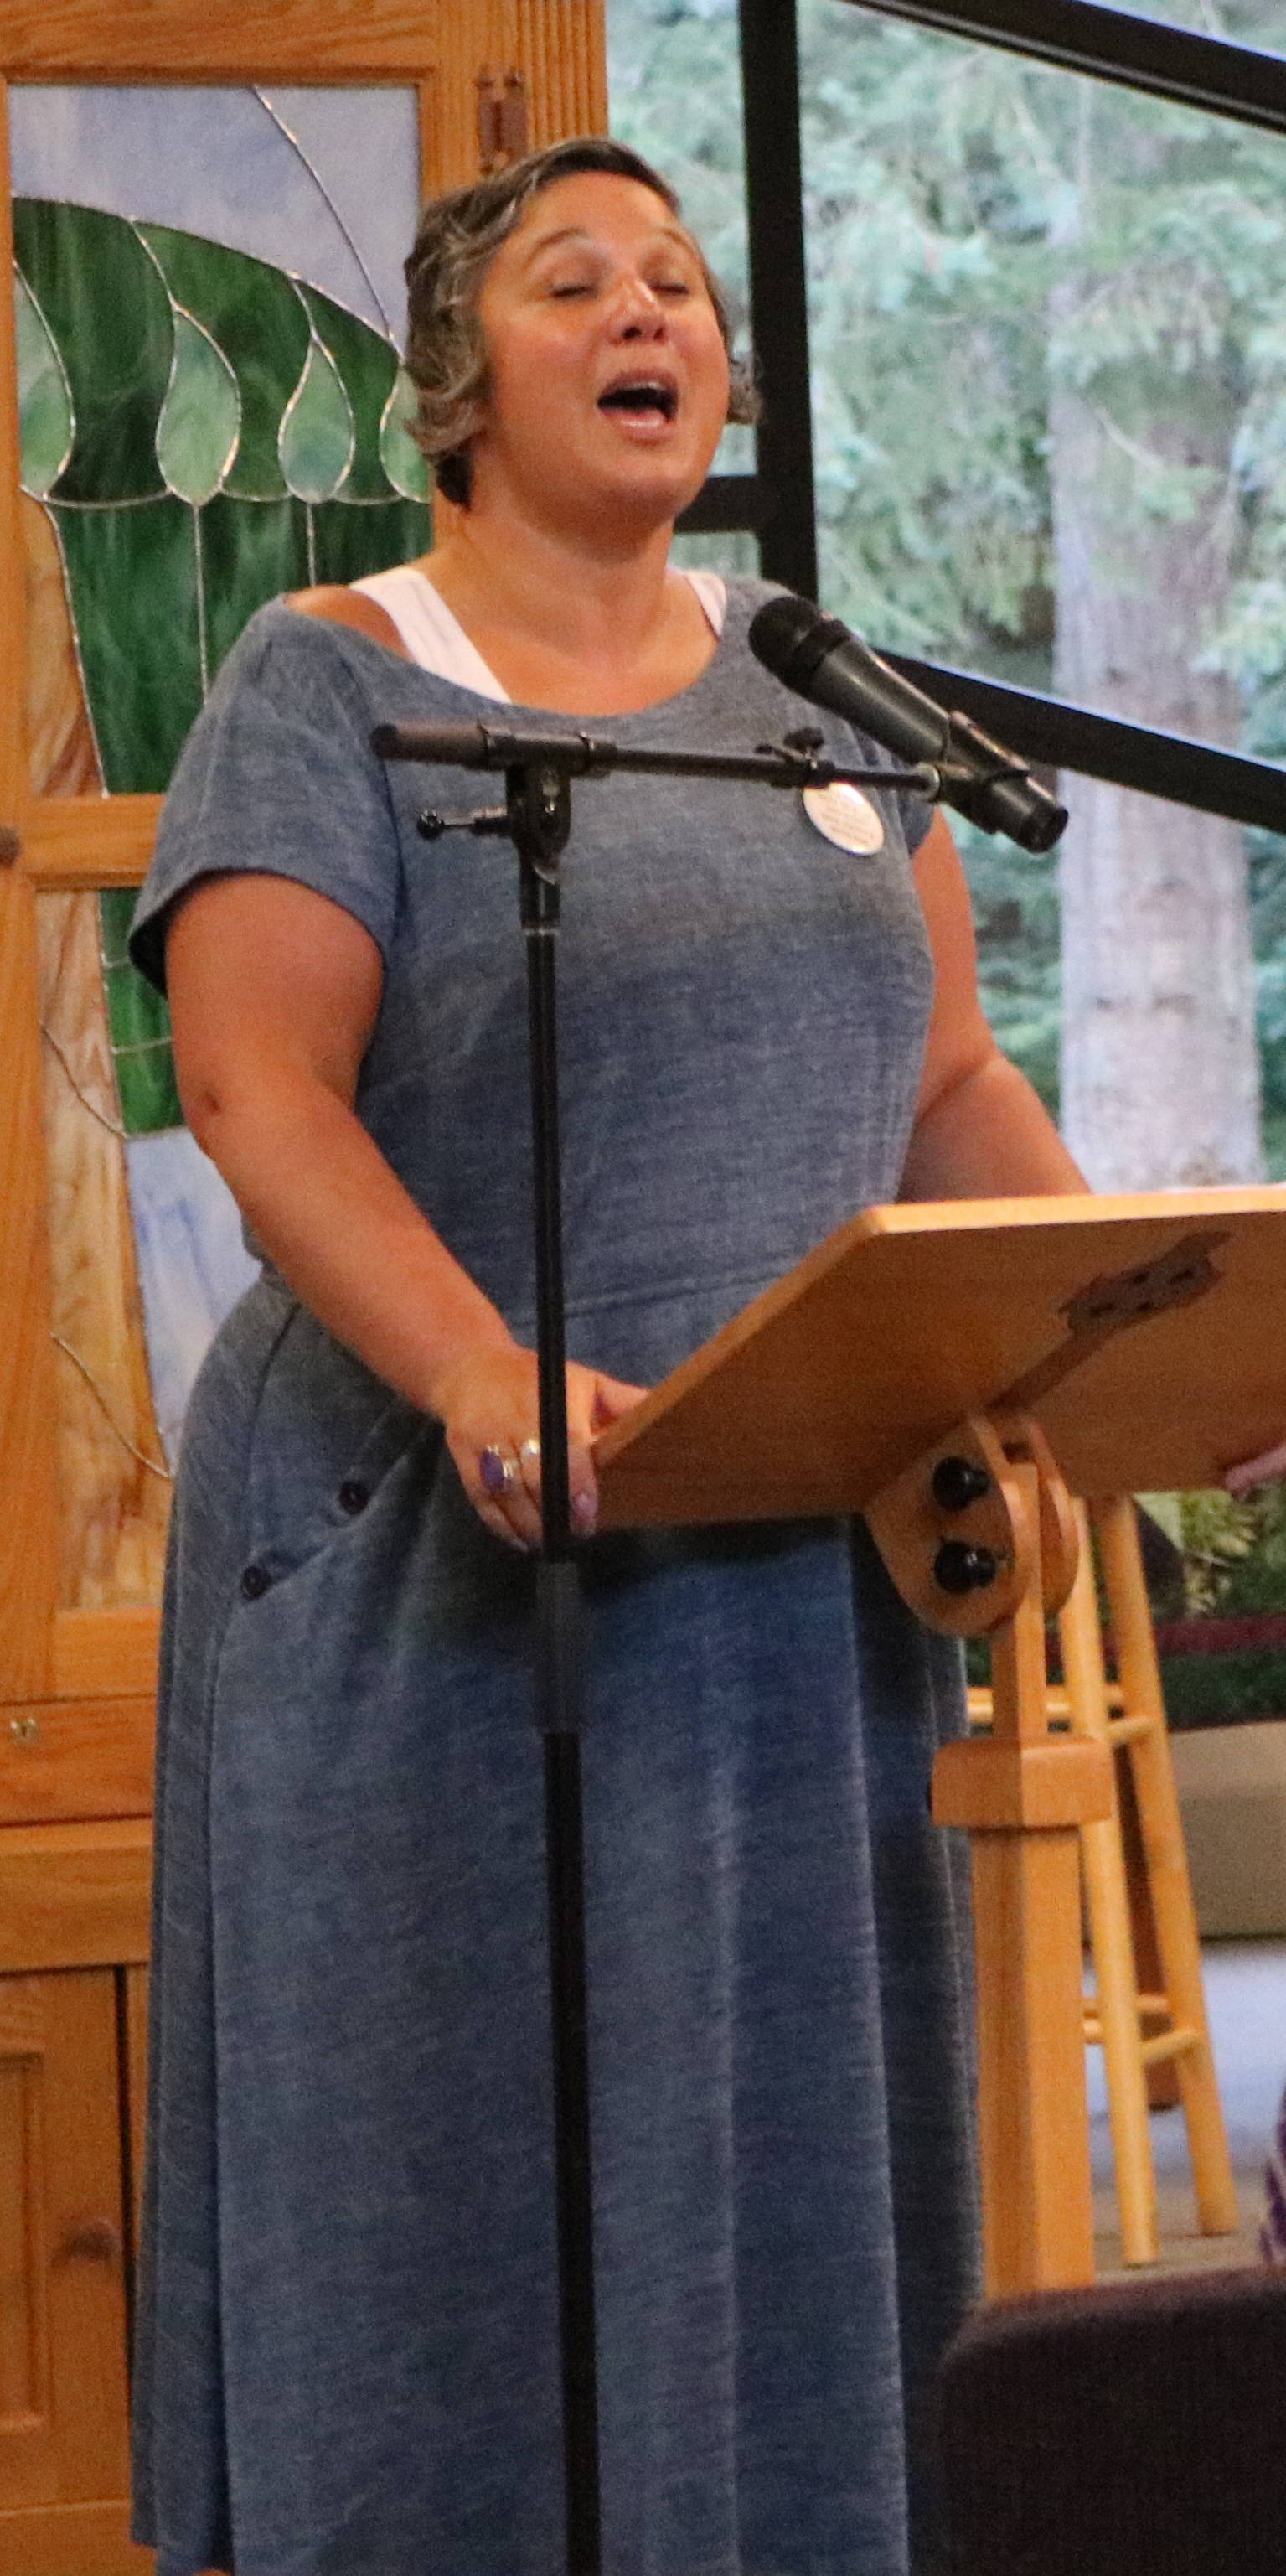 Rabbi Yohanna Kinberg leads vigil participants in song on Wednesday night at Congregation Kol Ami in Woodinville to remember Heather Heyer as well as offering calls for peace. The congregation serves the Redmond community. Aaron Kunkler/Redmond Reporter